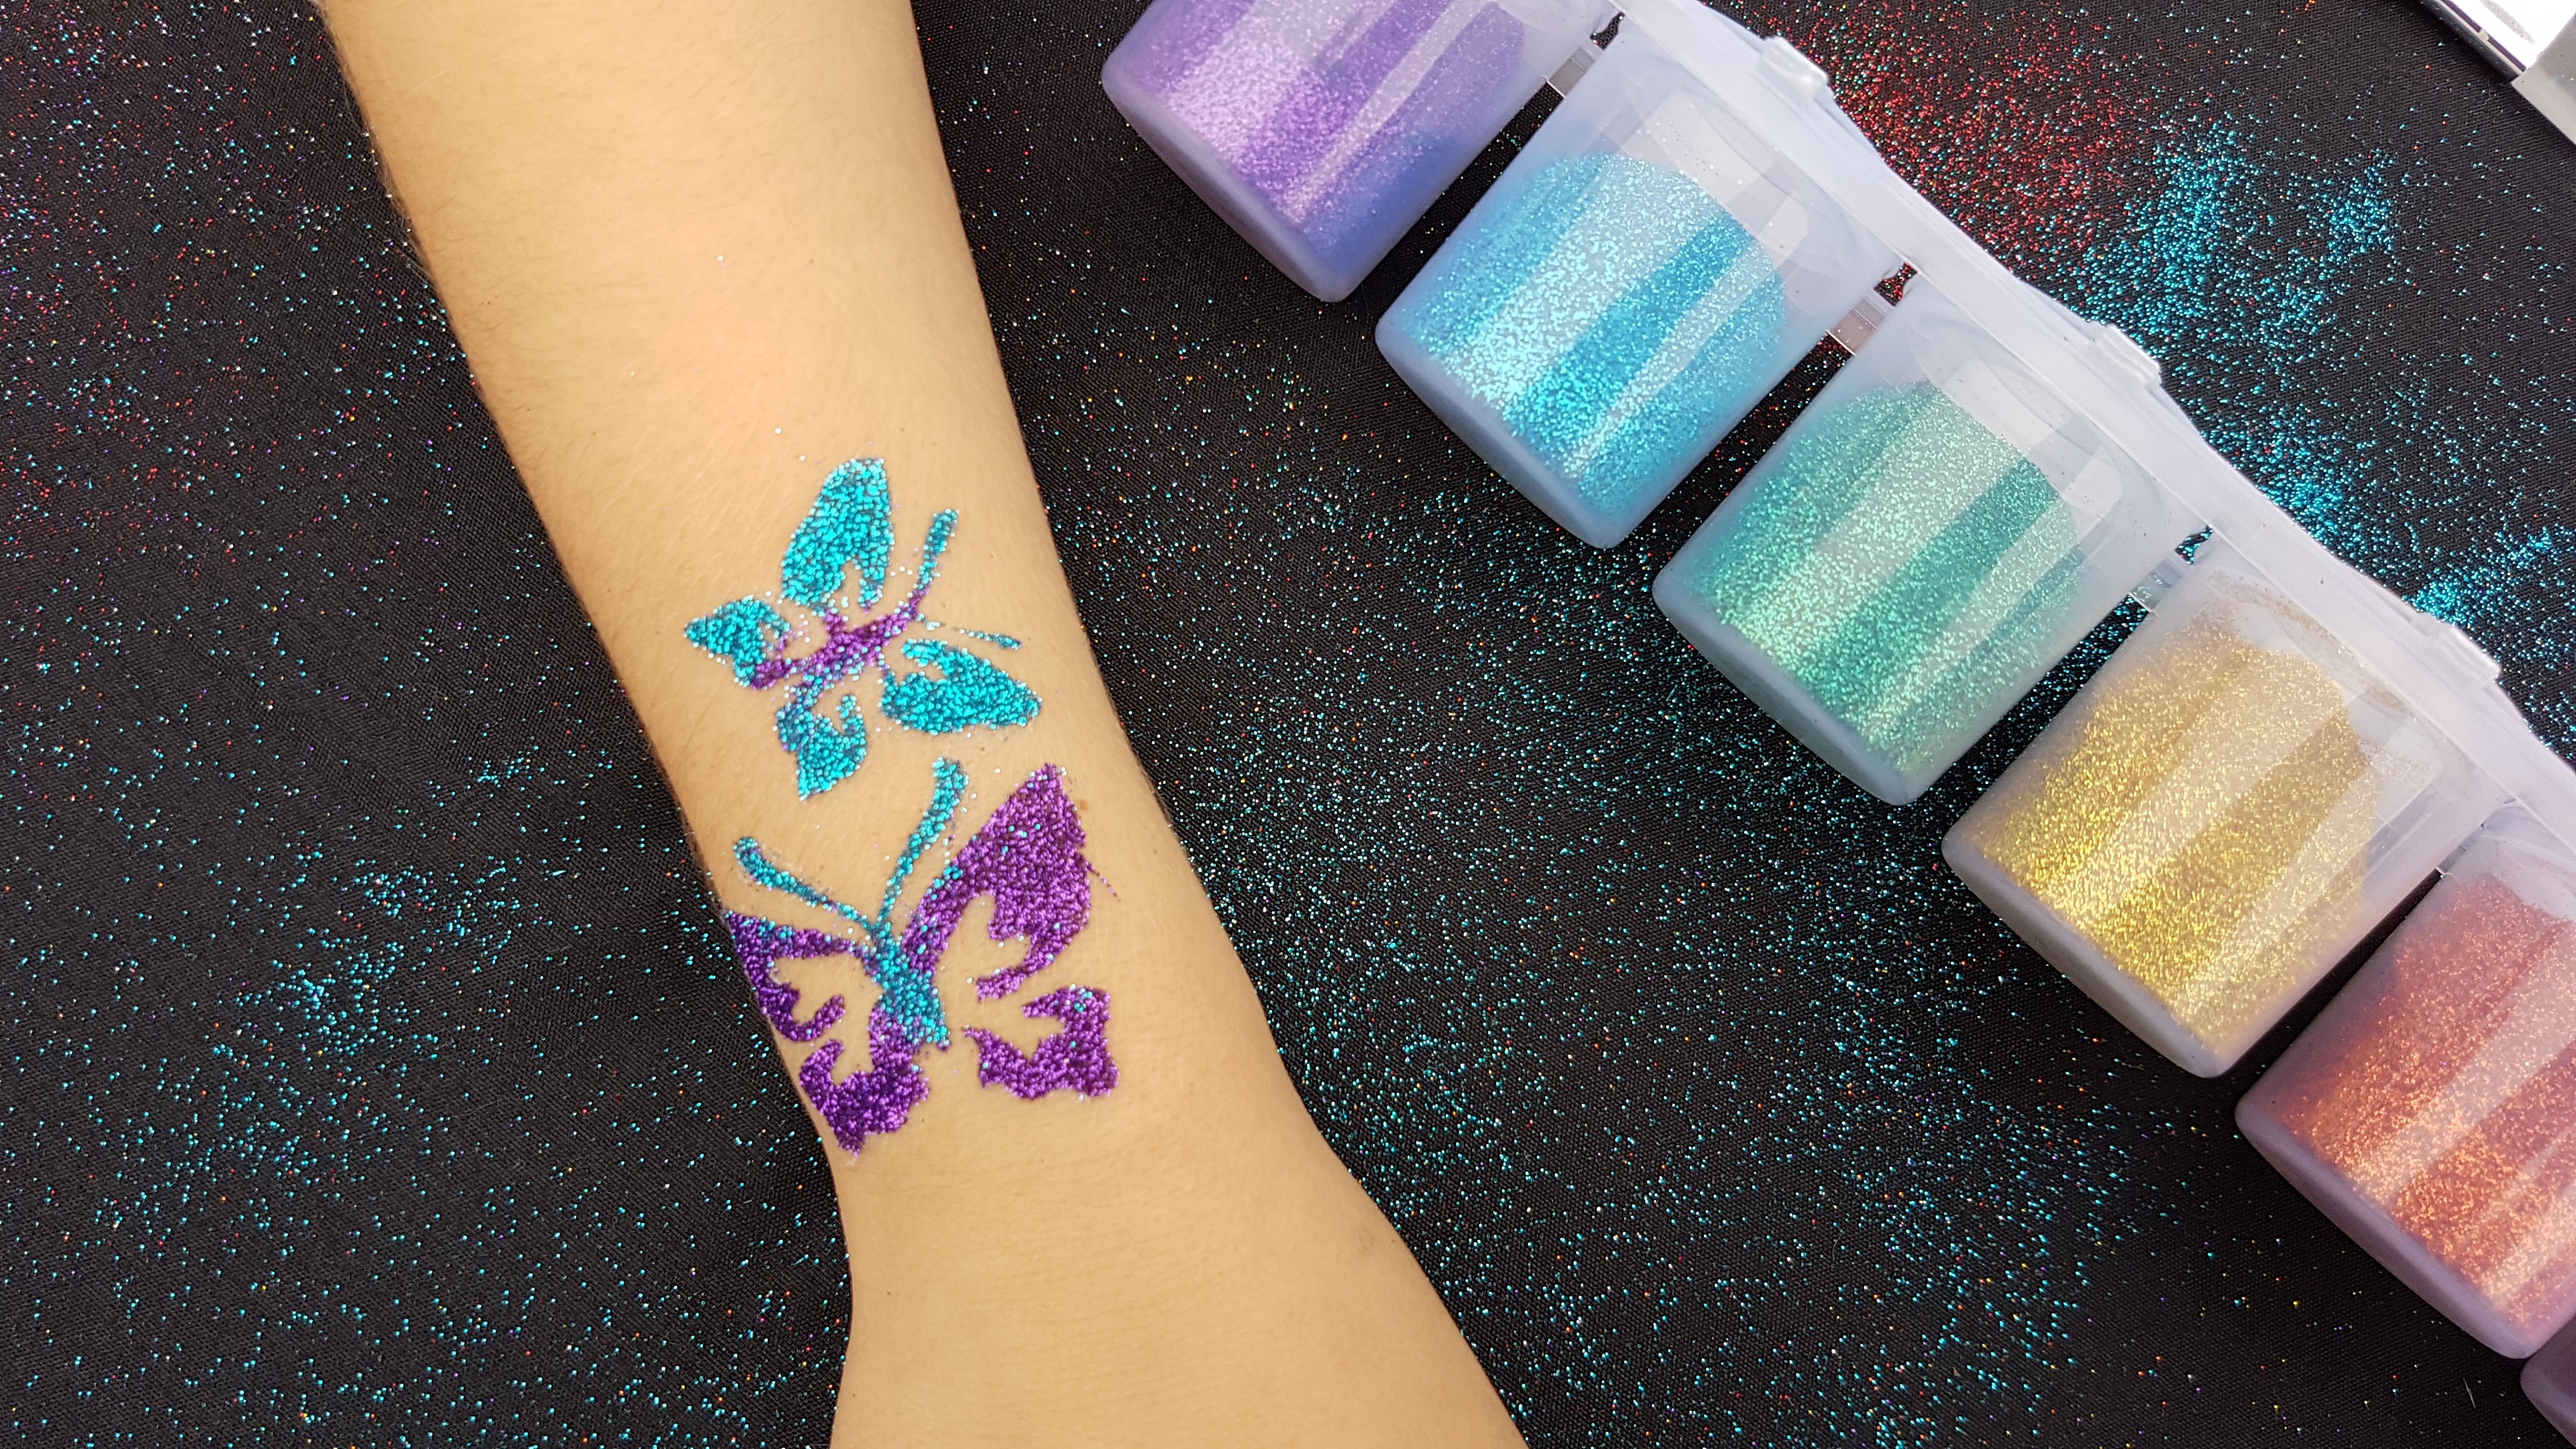 25 Tremendous Glitter Tattoos That Sparkle With Tiny Dots  Glitter tattoo Sparkle  tattoo Tattoos